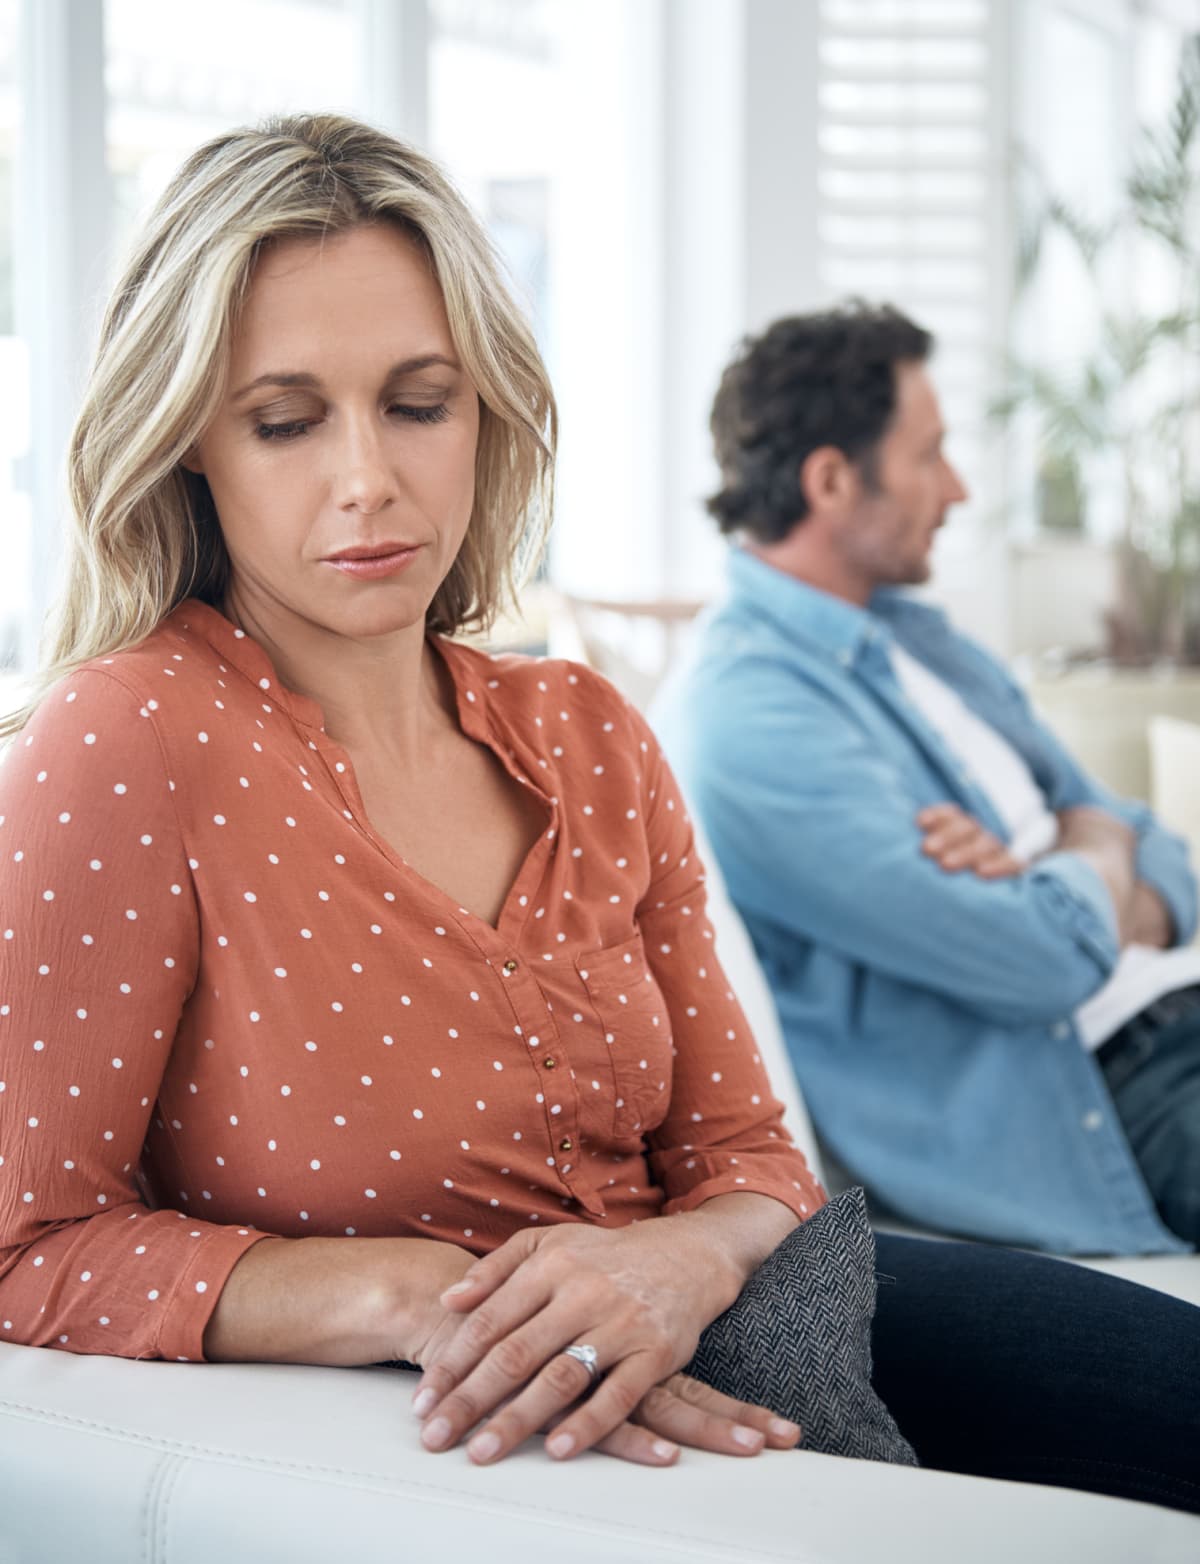 A woman with a sad expression on her face sits on a couch next to her partner who has his arms crossed